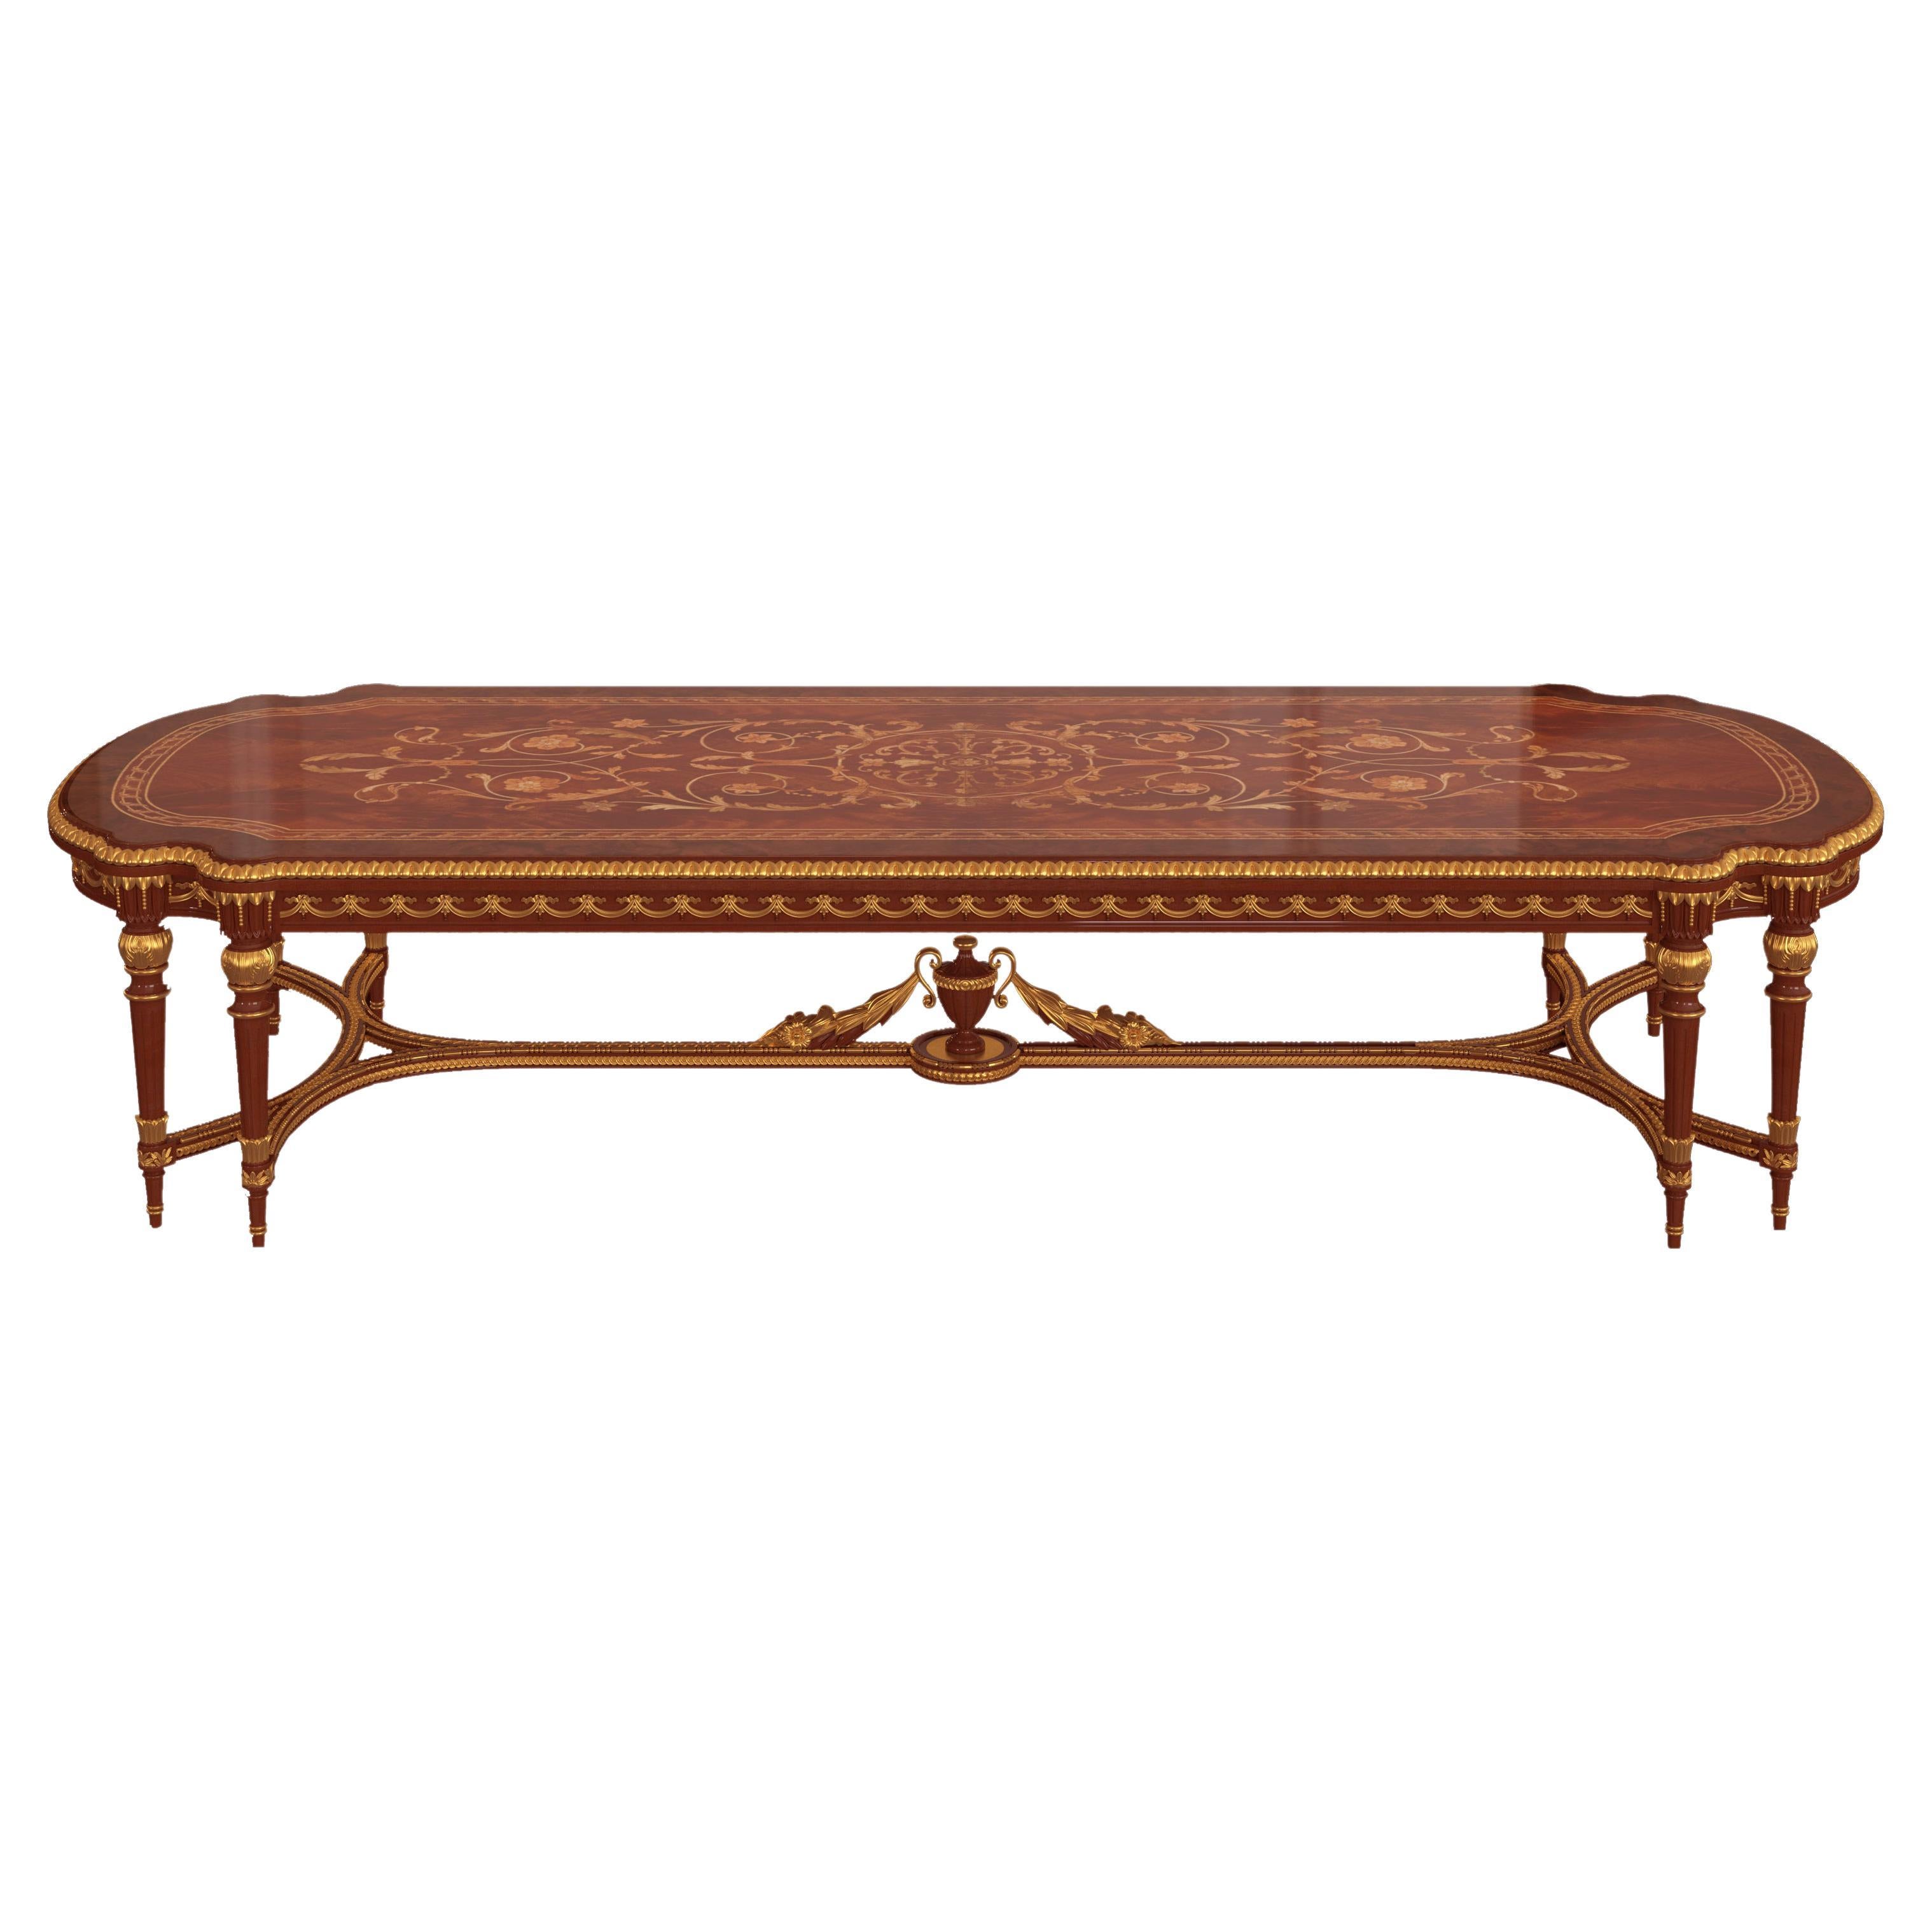 Classic Victorian Dining Table with Inlaid Top and Walnut Finish by Modenese